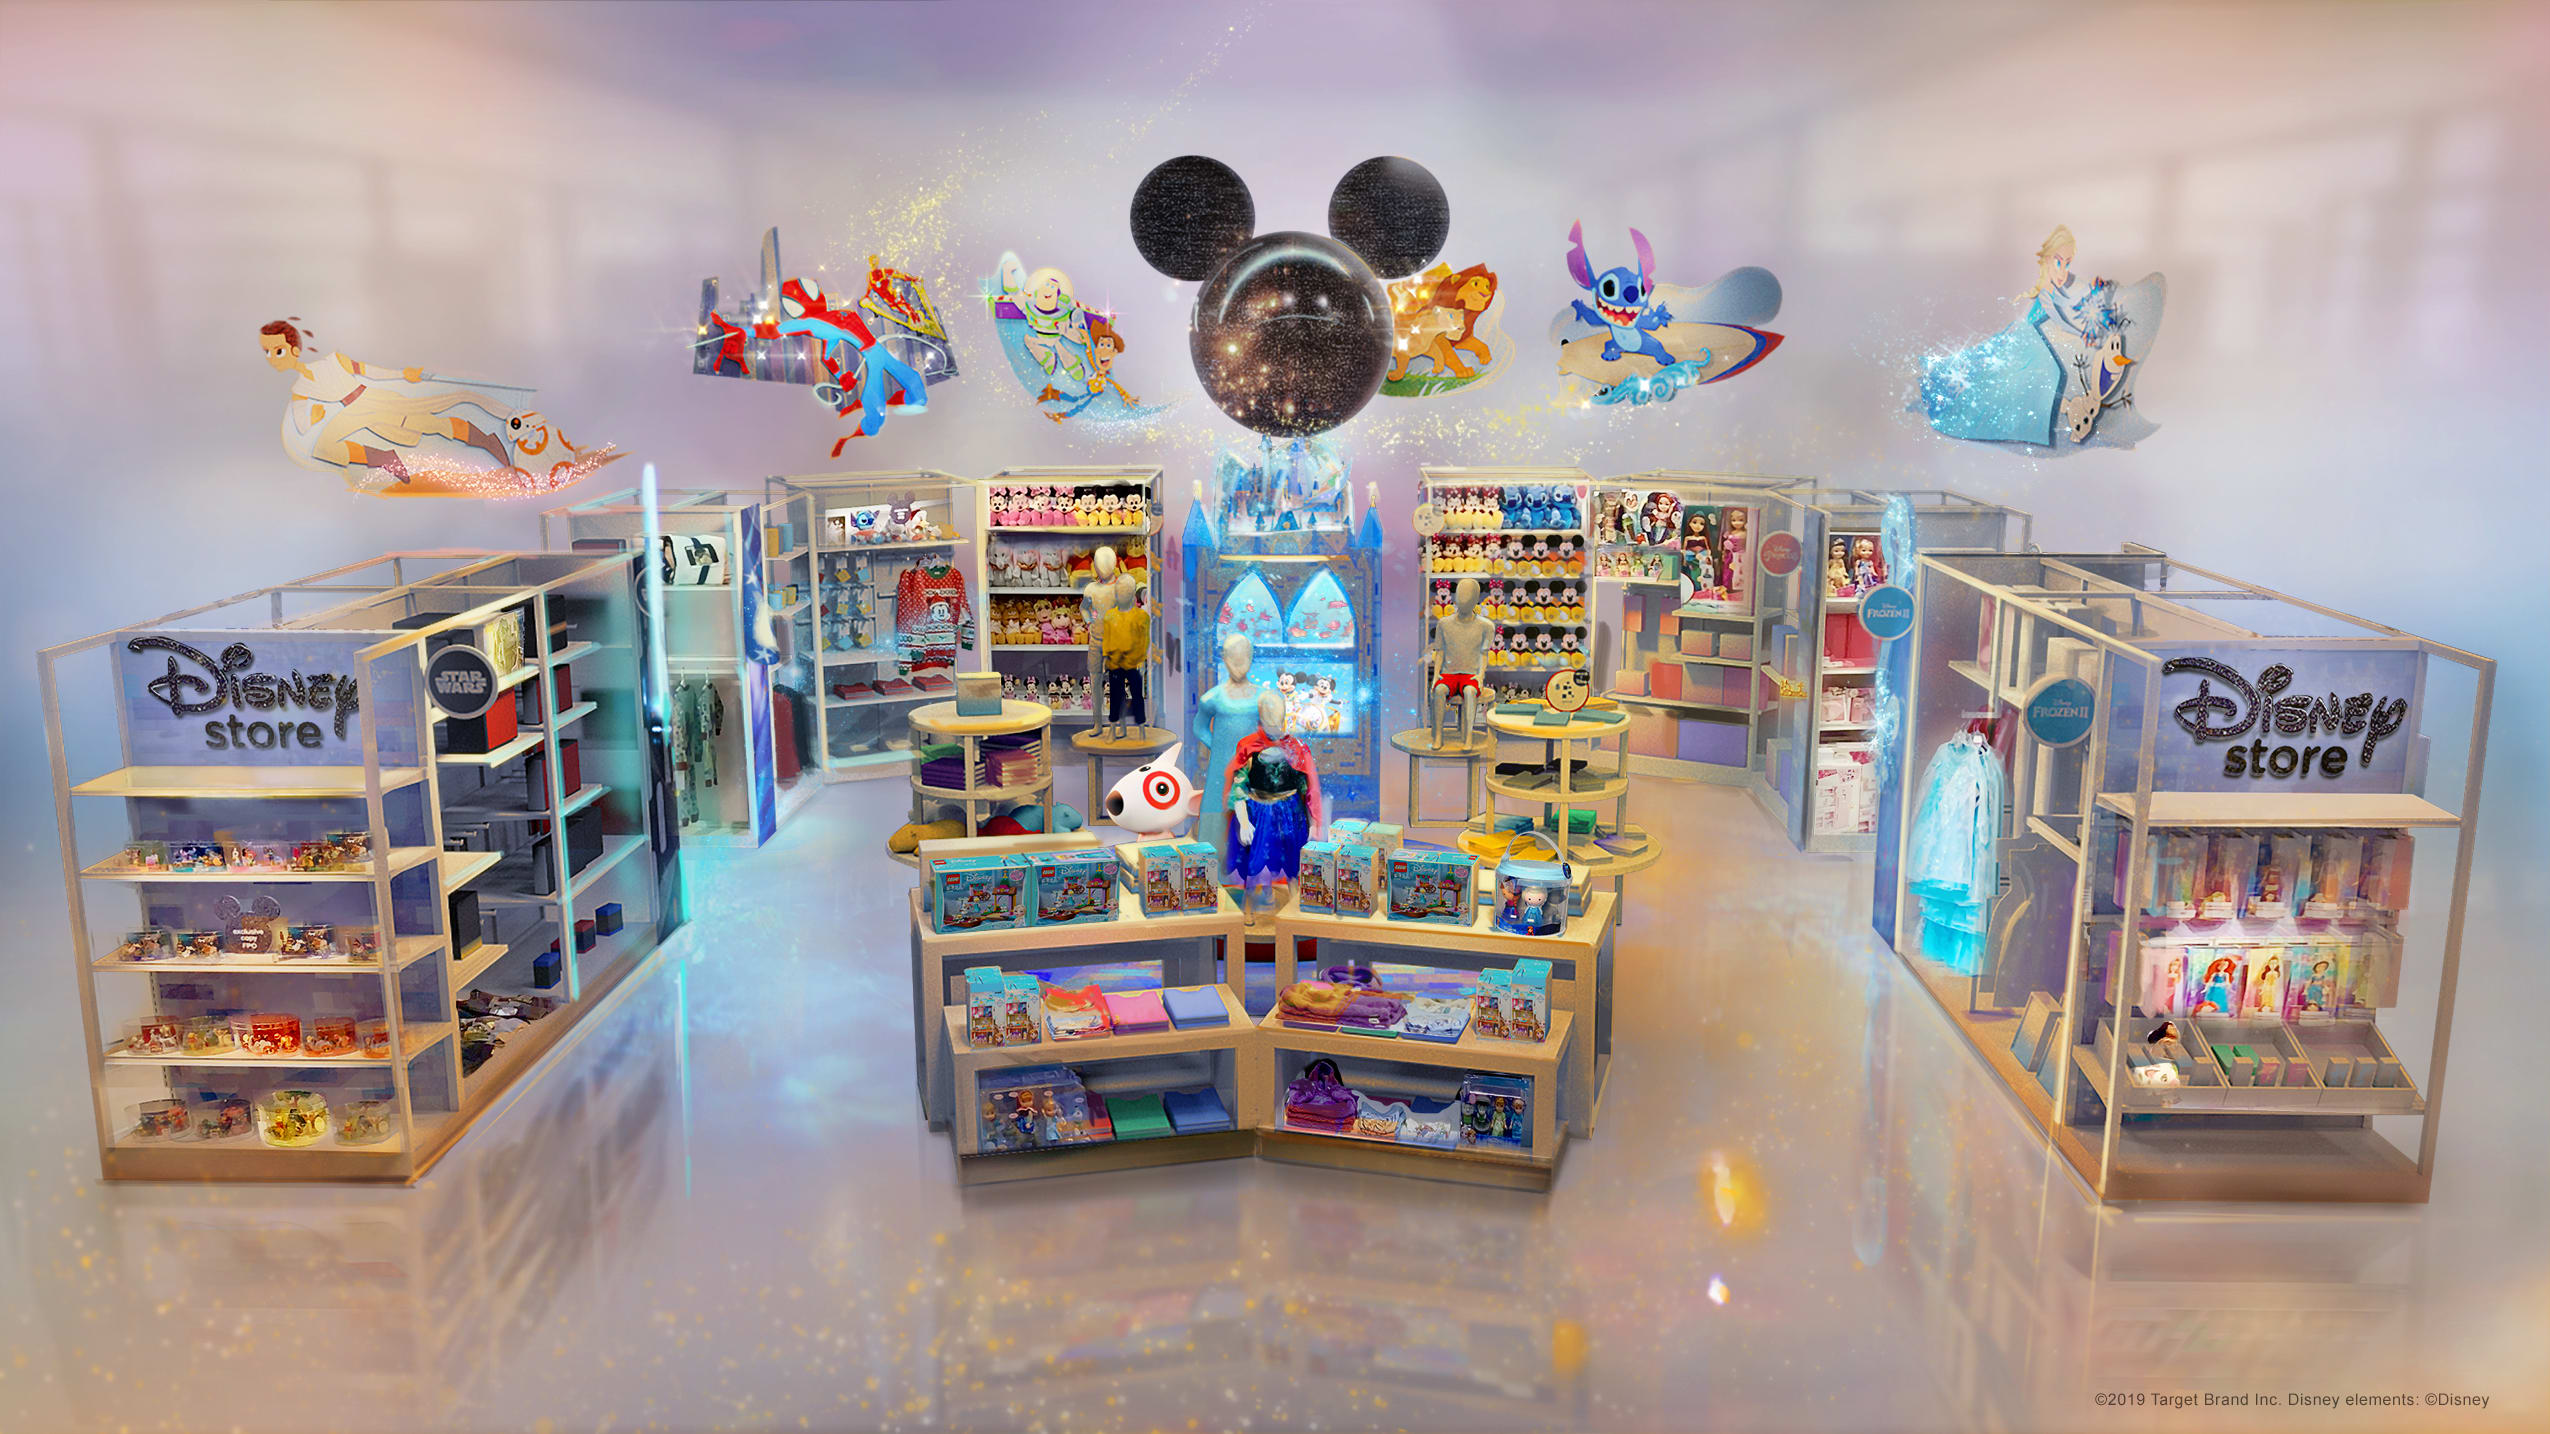 Disney and Target are teaming up to open stores with each other's help